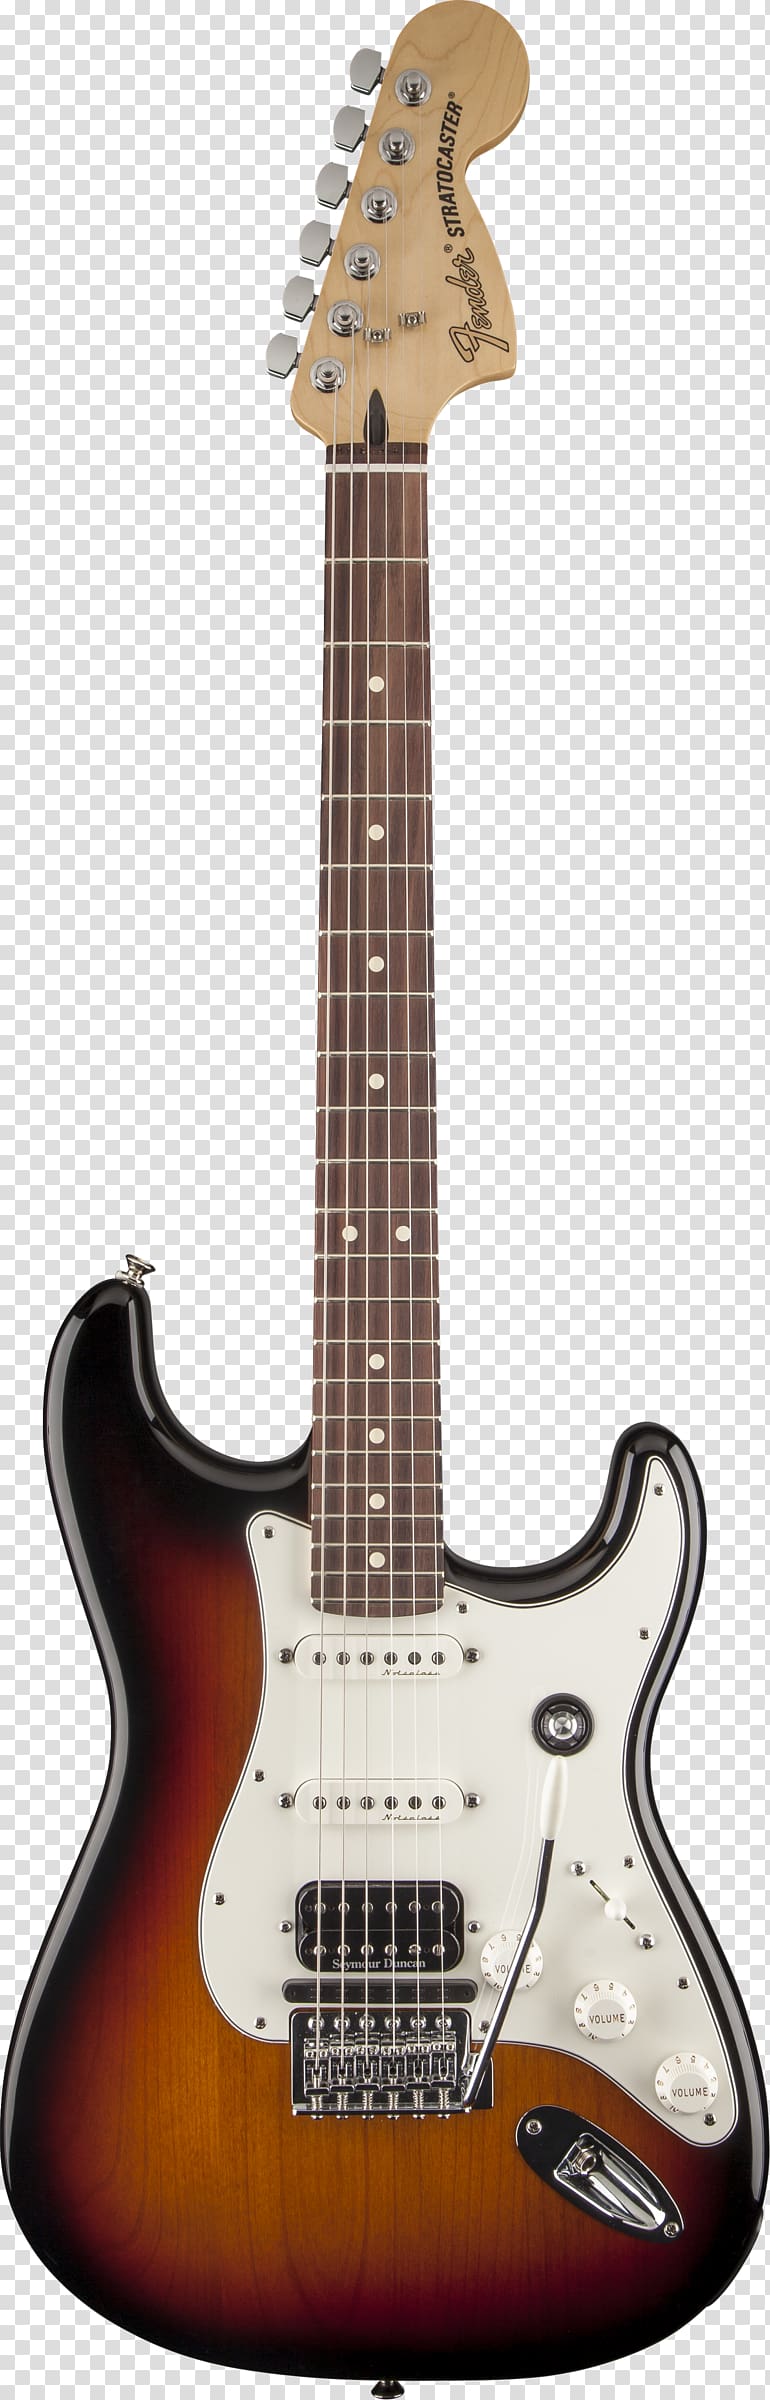 Fender Stratocaster Fender Musical Instruments Corporation Squier Electric guitar Fender American Deluxe Series, electric guitar transparent background PNG clipart